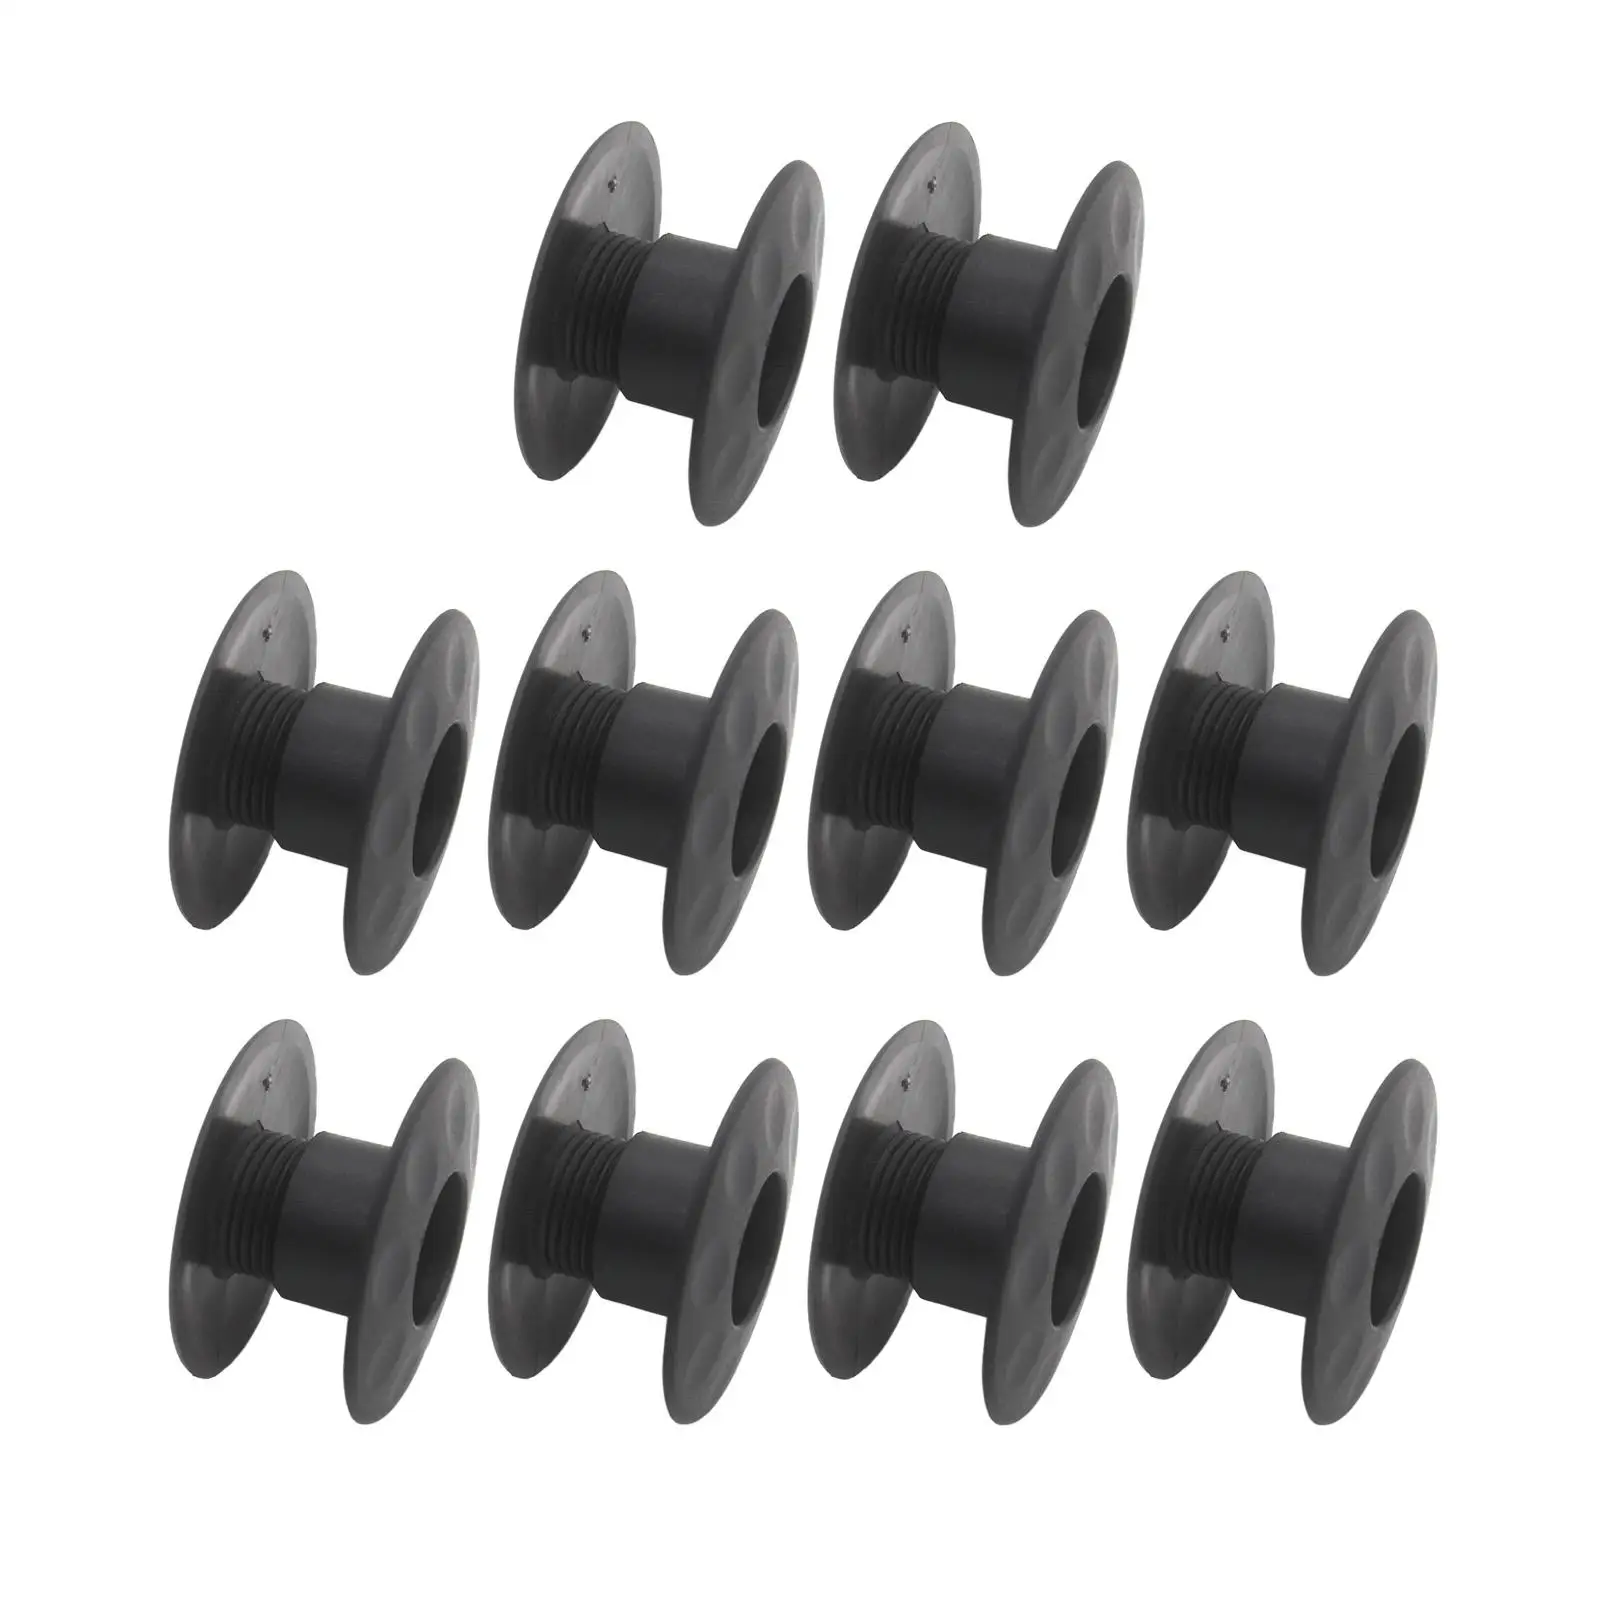 10 Sets Foosball Bearing Rods Replacement Parts, Table Foosball Bushings Accessories Parts